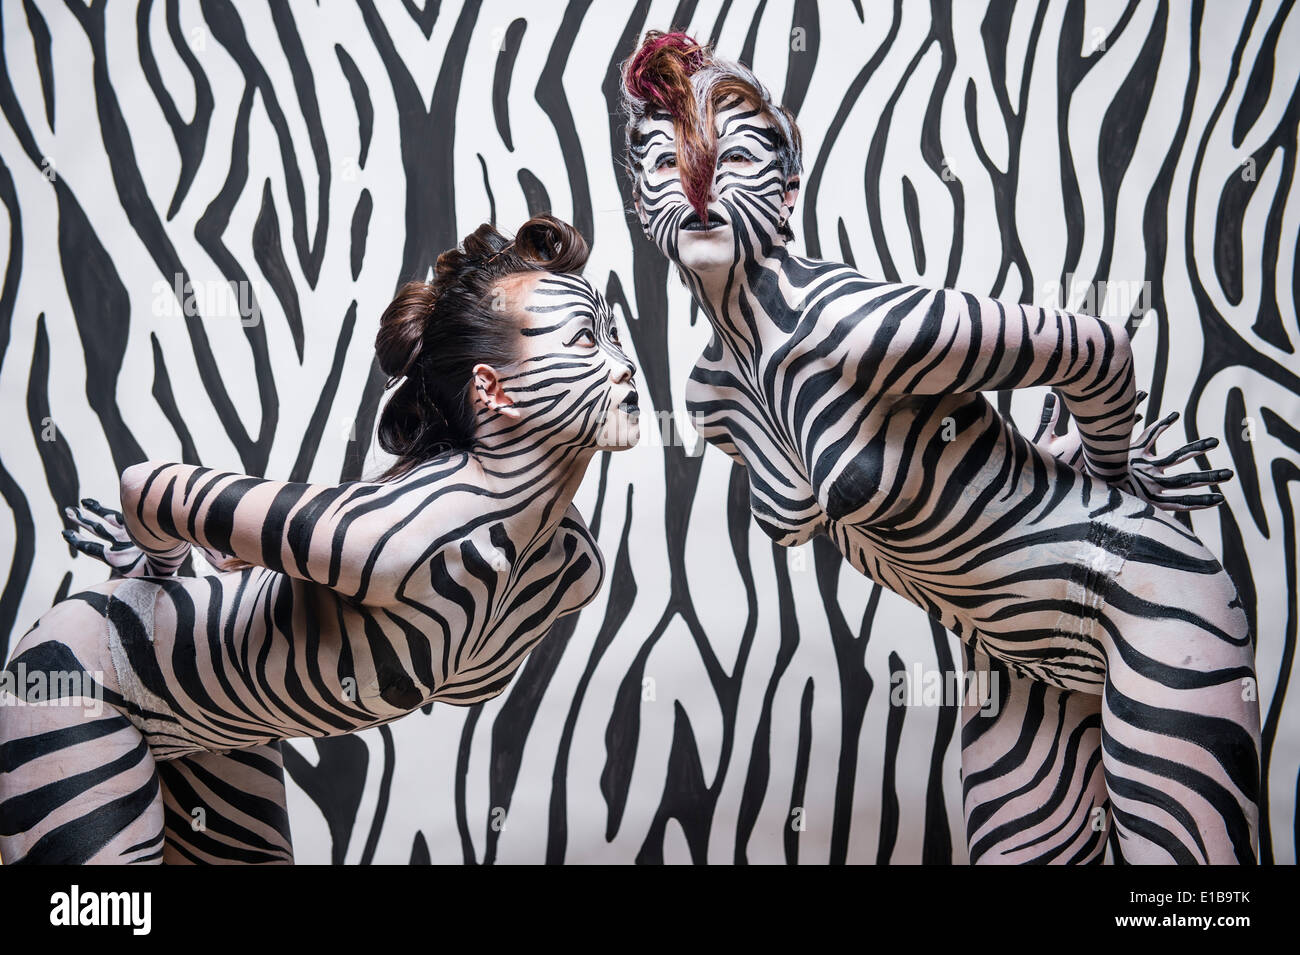 Two women girls with their bodies painted in black and white zebra stripes to match the background Stock Photo